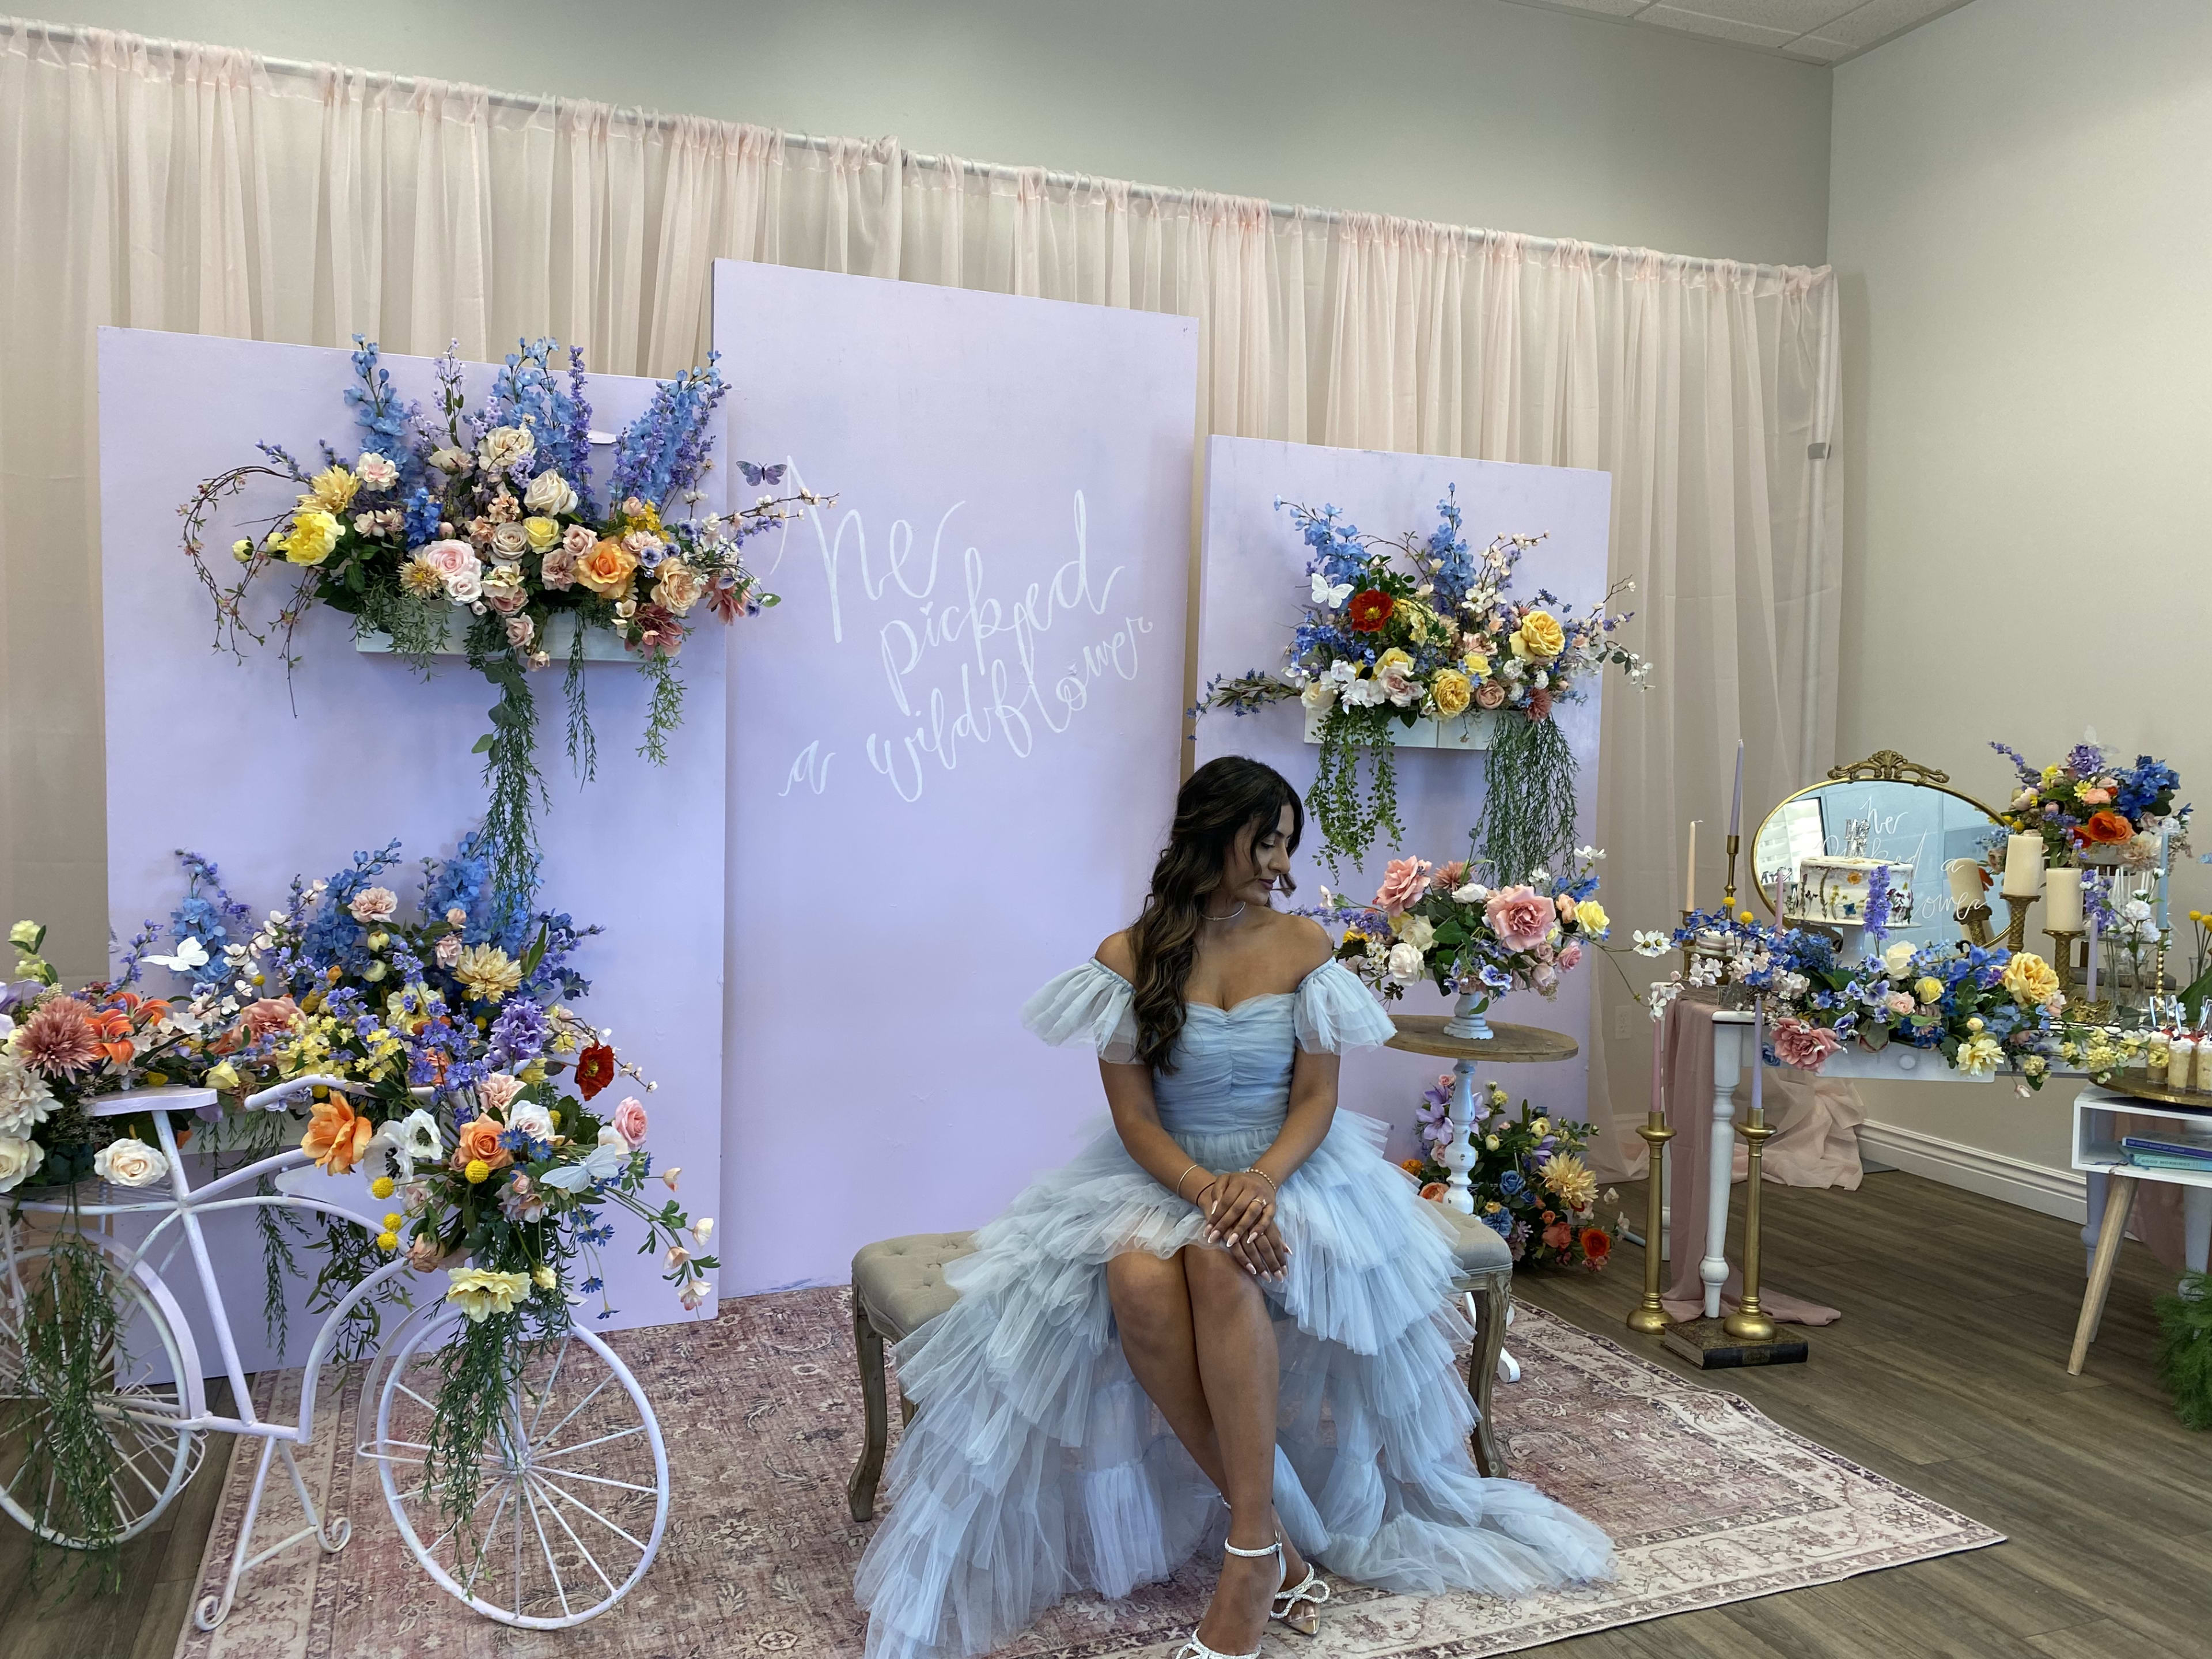 A bride-to-be seated on a chair admiring a garden of purple and blue flowers for her spring bridal shower.